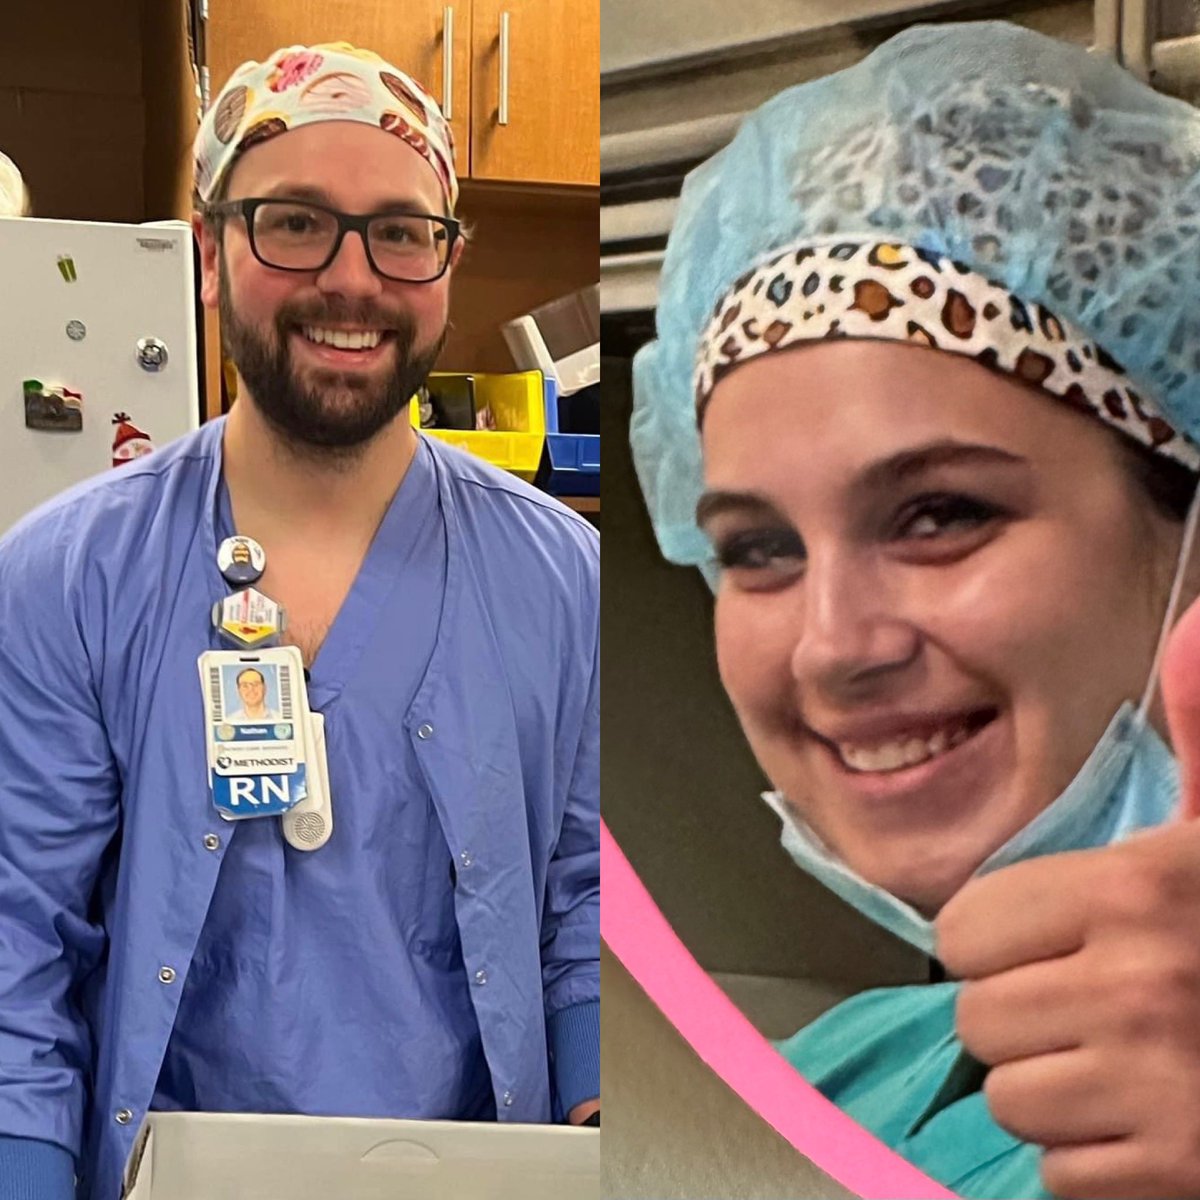 Today I would like to celebrate the nurses that are willing to go the extra mile and precept new hires. I would like to thank these two individuals personally. Nathan J. was my preceptor when I started at Methodist in the OR. He was/is a great example of patient care and…